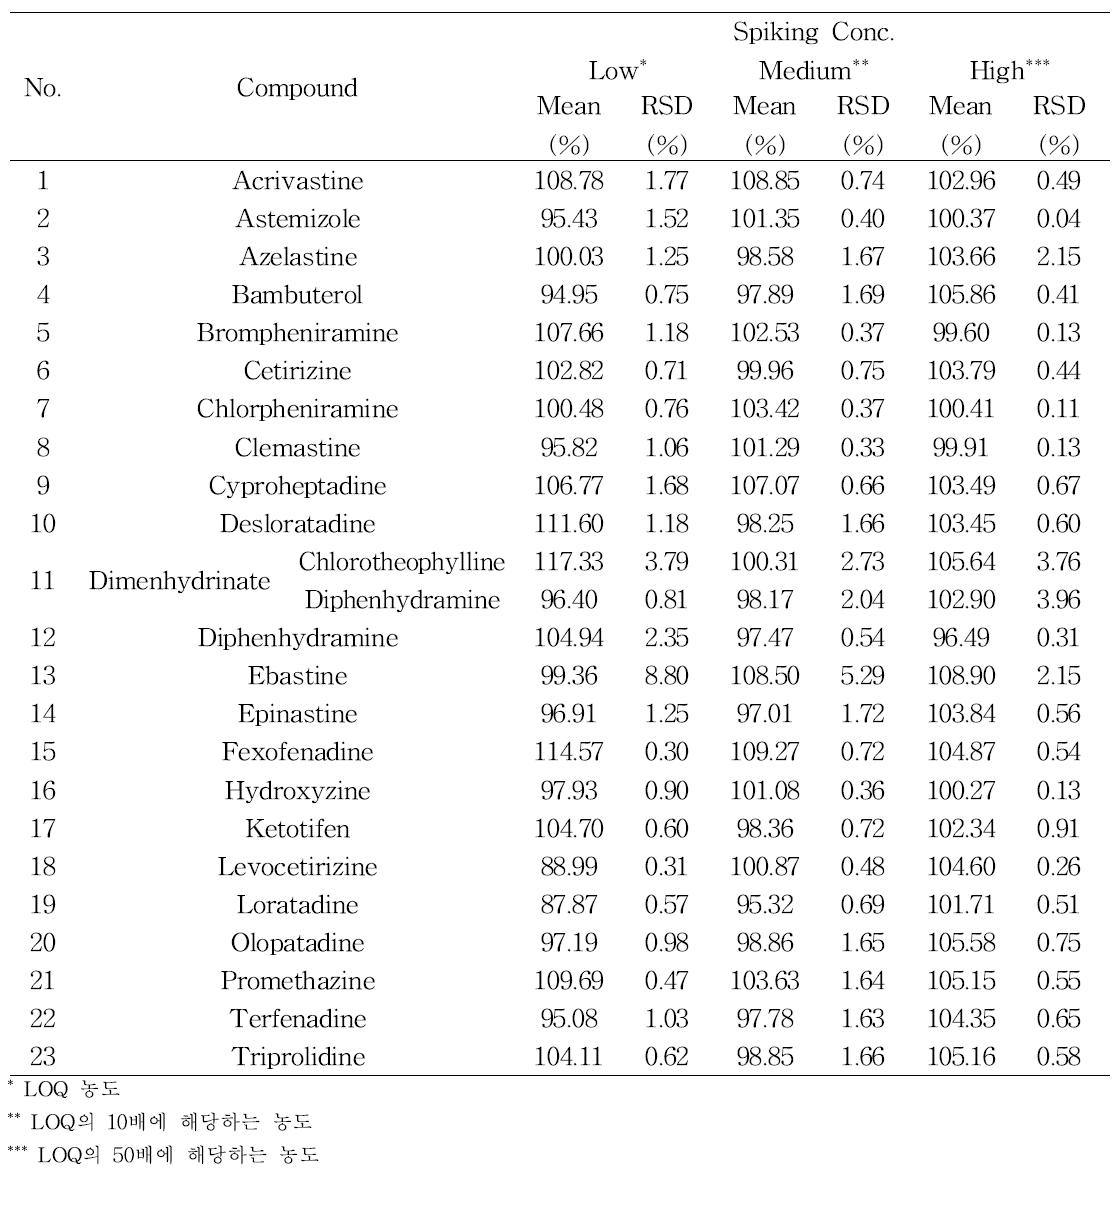 The recovery of 23 antihistamines in pill sample for different concentrations